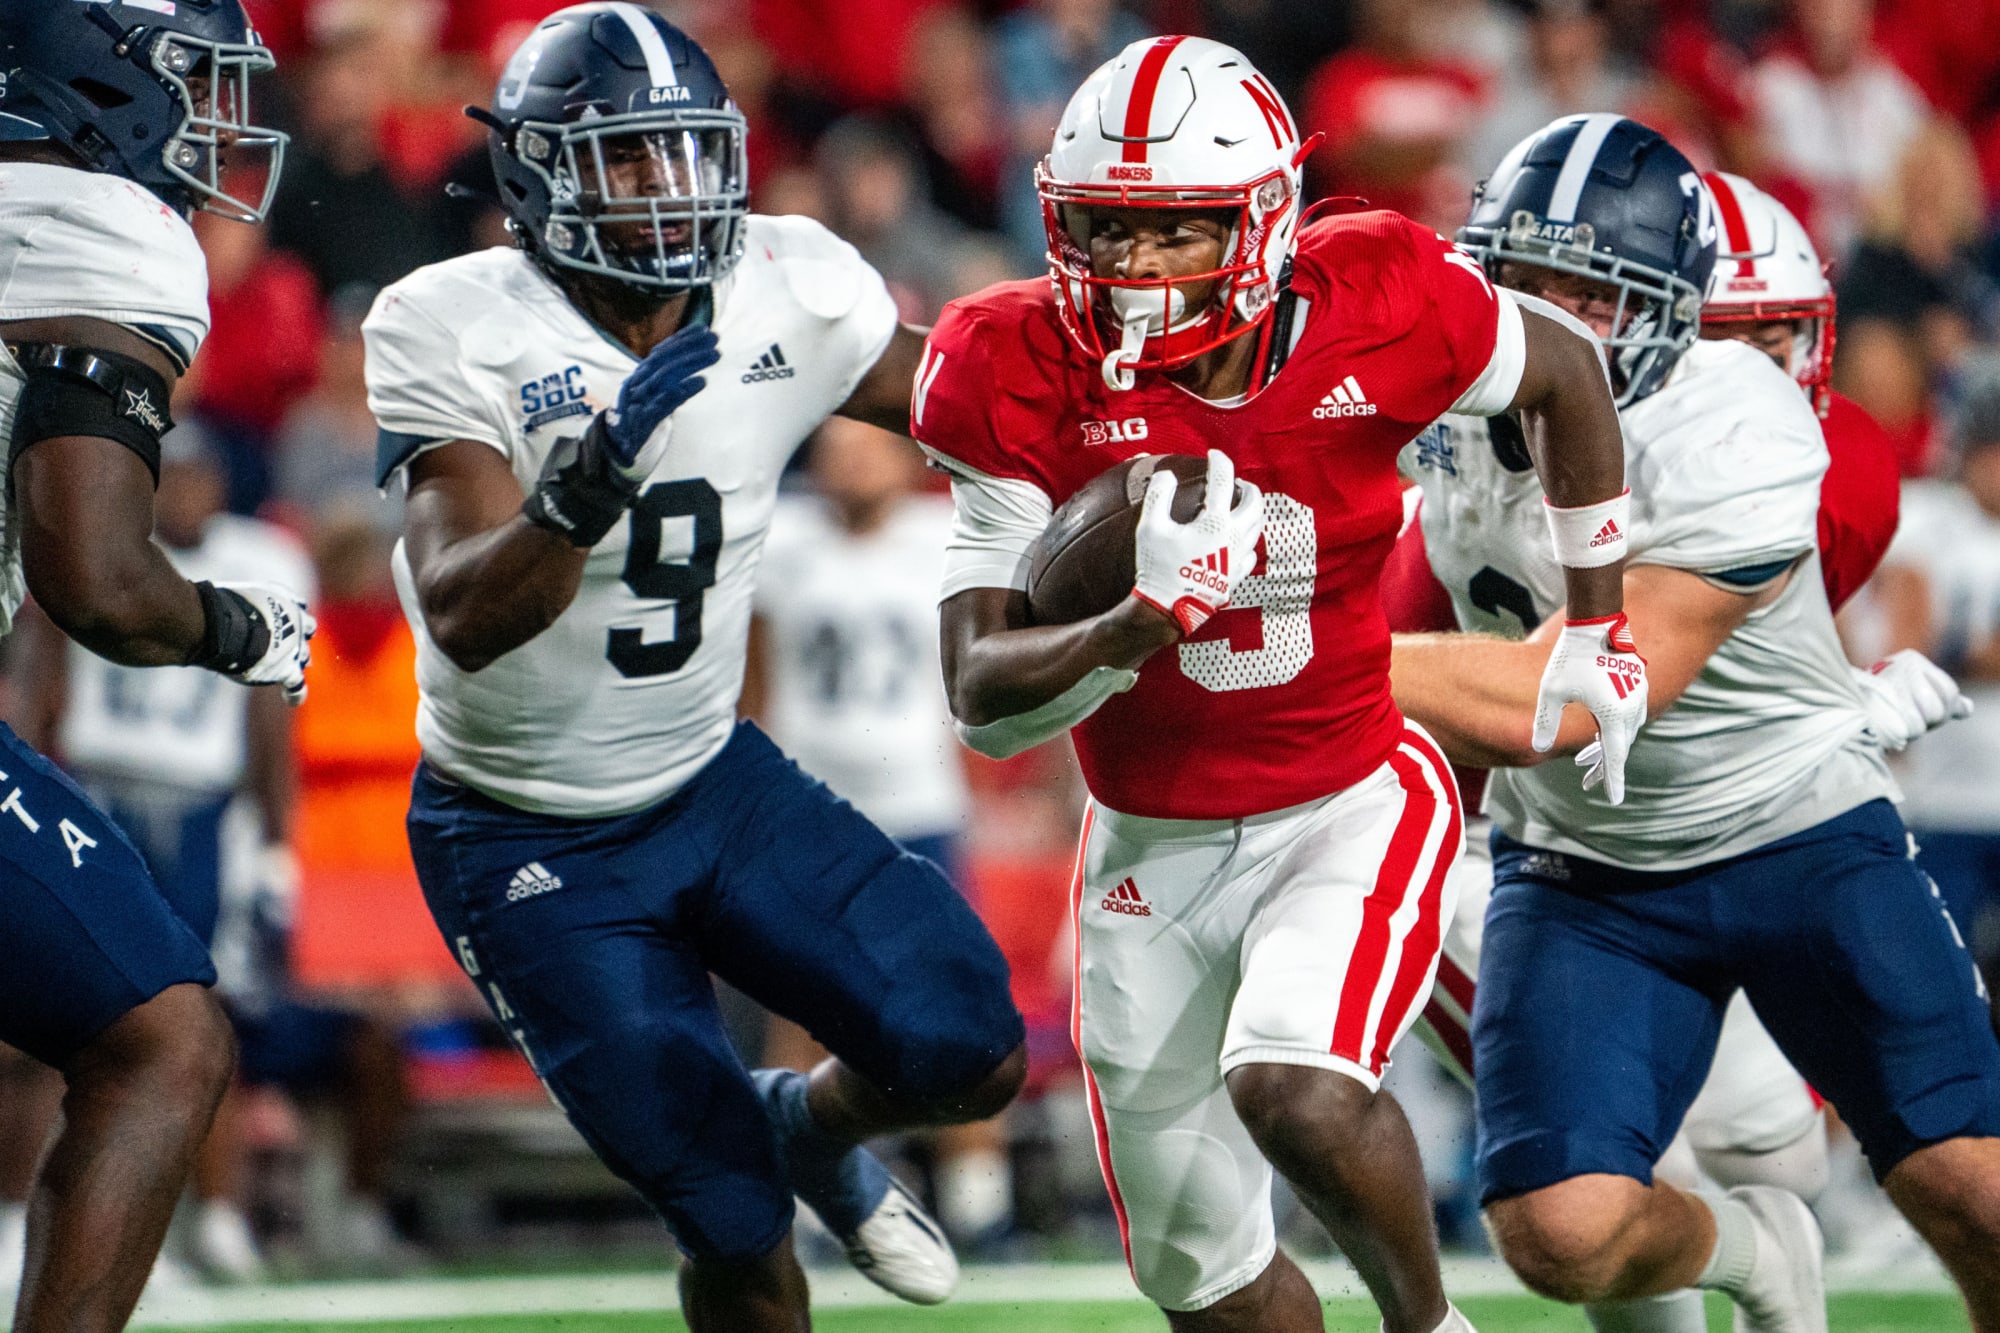 Nebraska football: 3 second-year players who’ll become stars in 2023